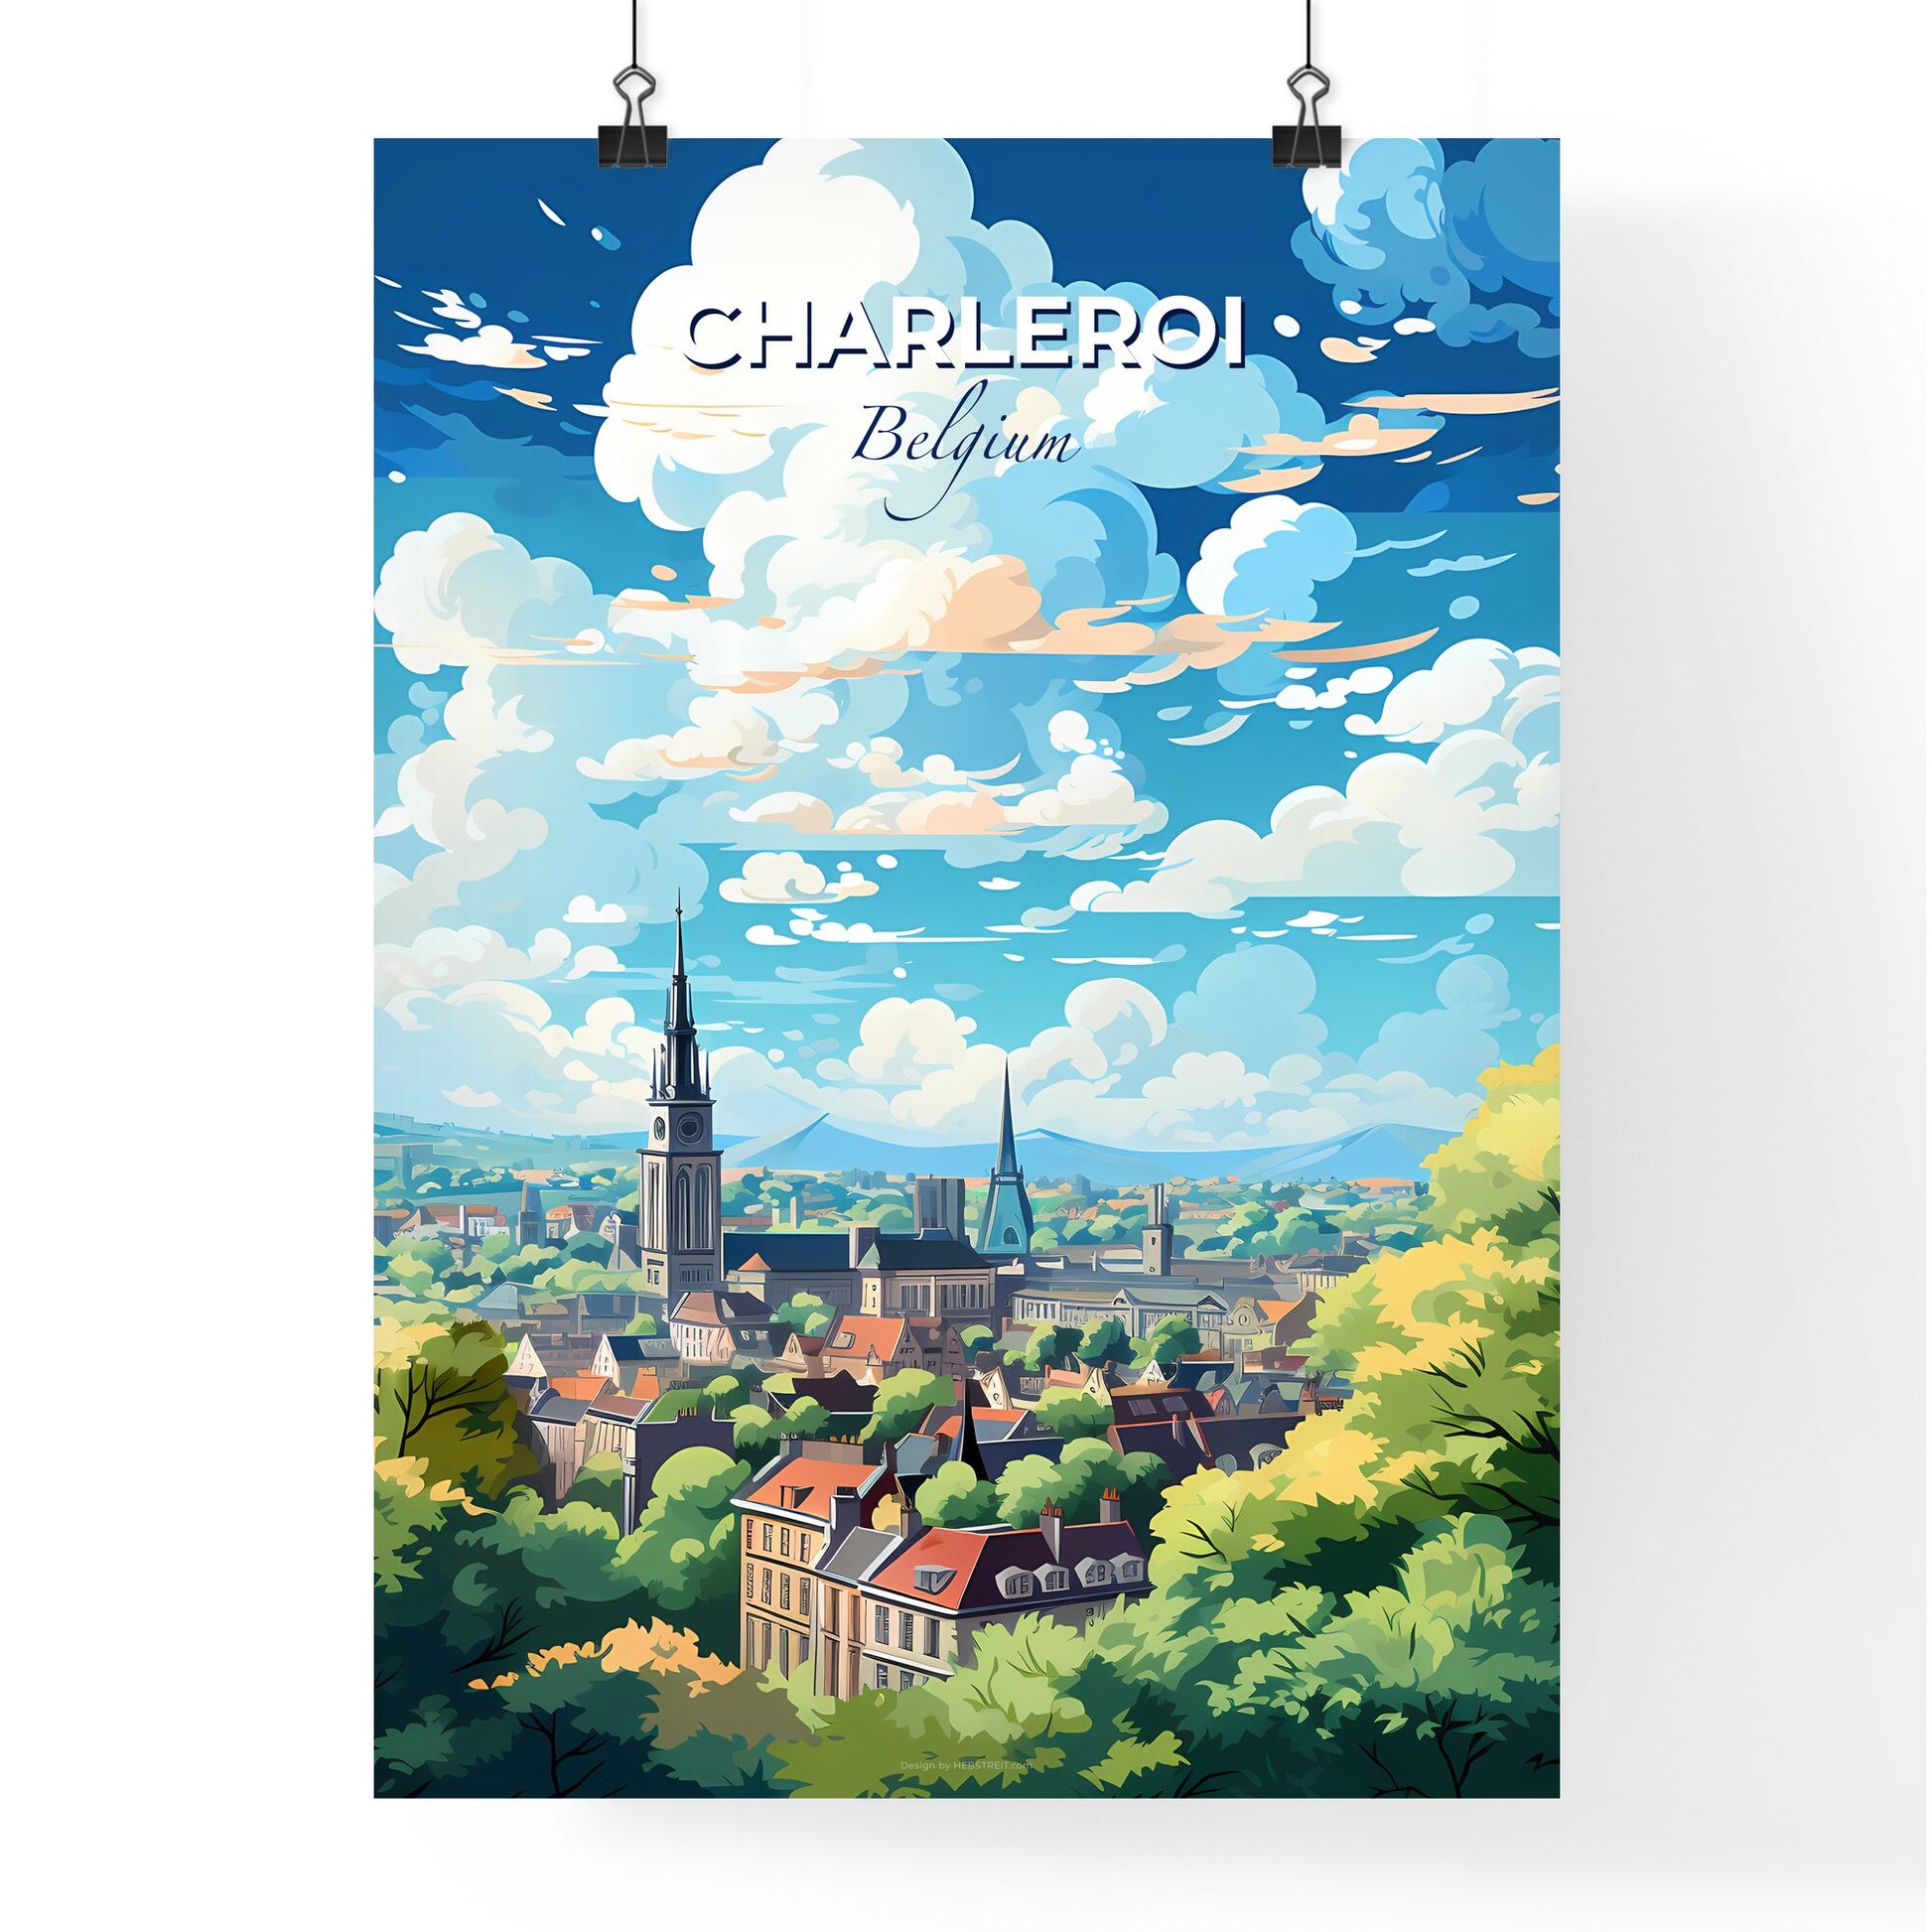 Charleroi Belgium Skyline - A City Landscape With Trees And Blue Sky - Customizable Travel Gift Default Title